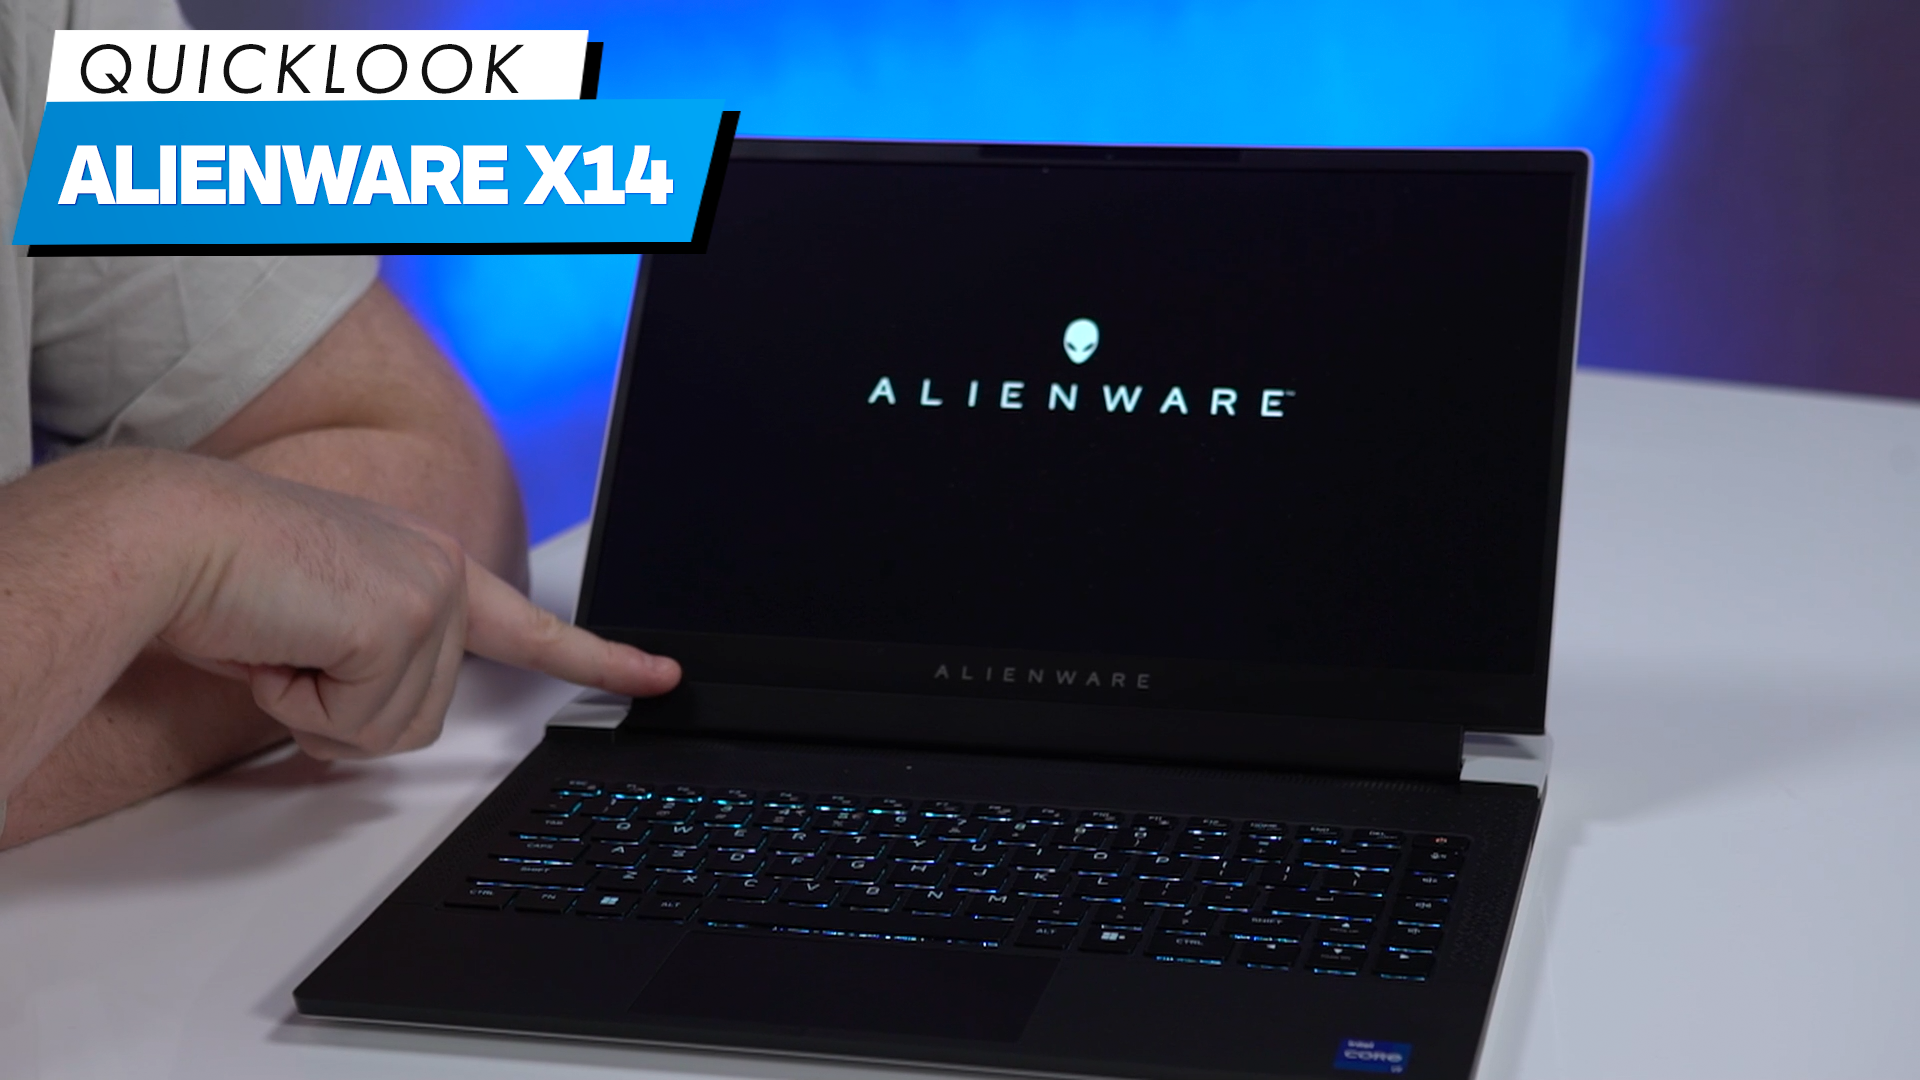 We have already tested the Alienware x14